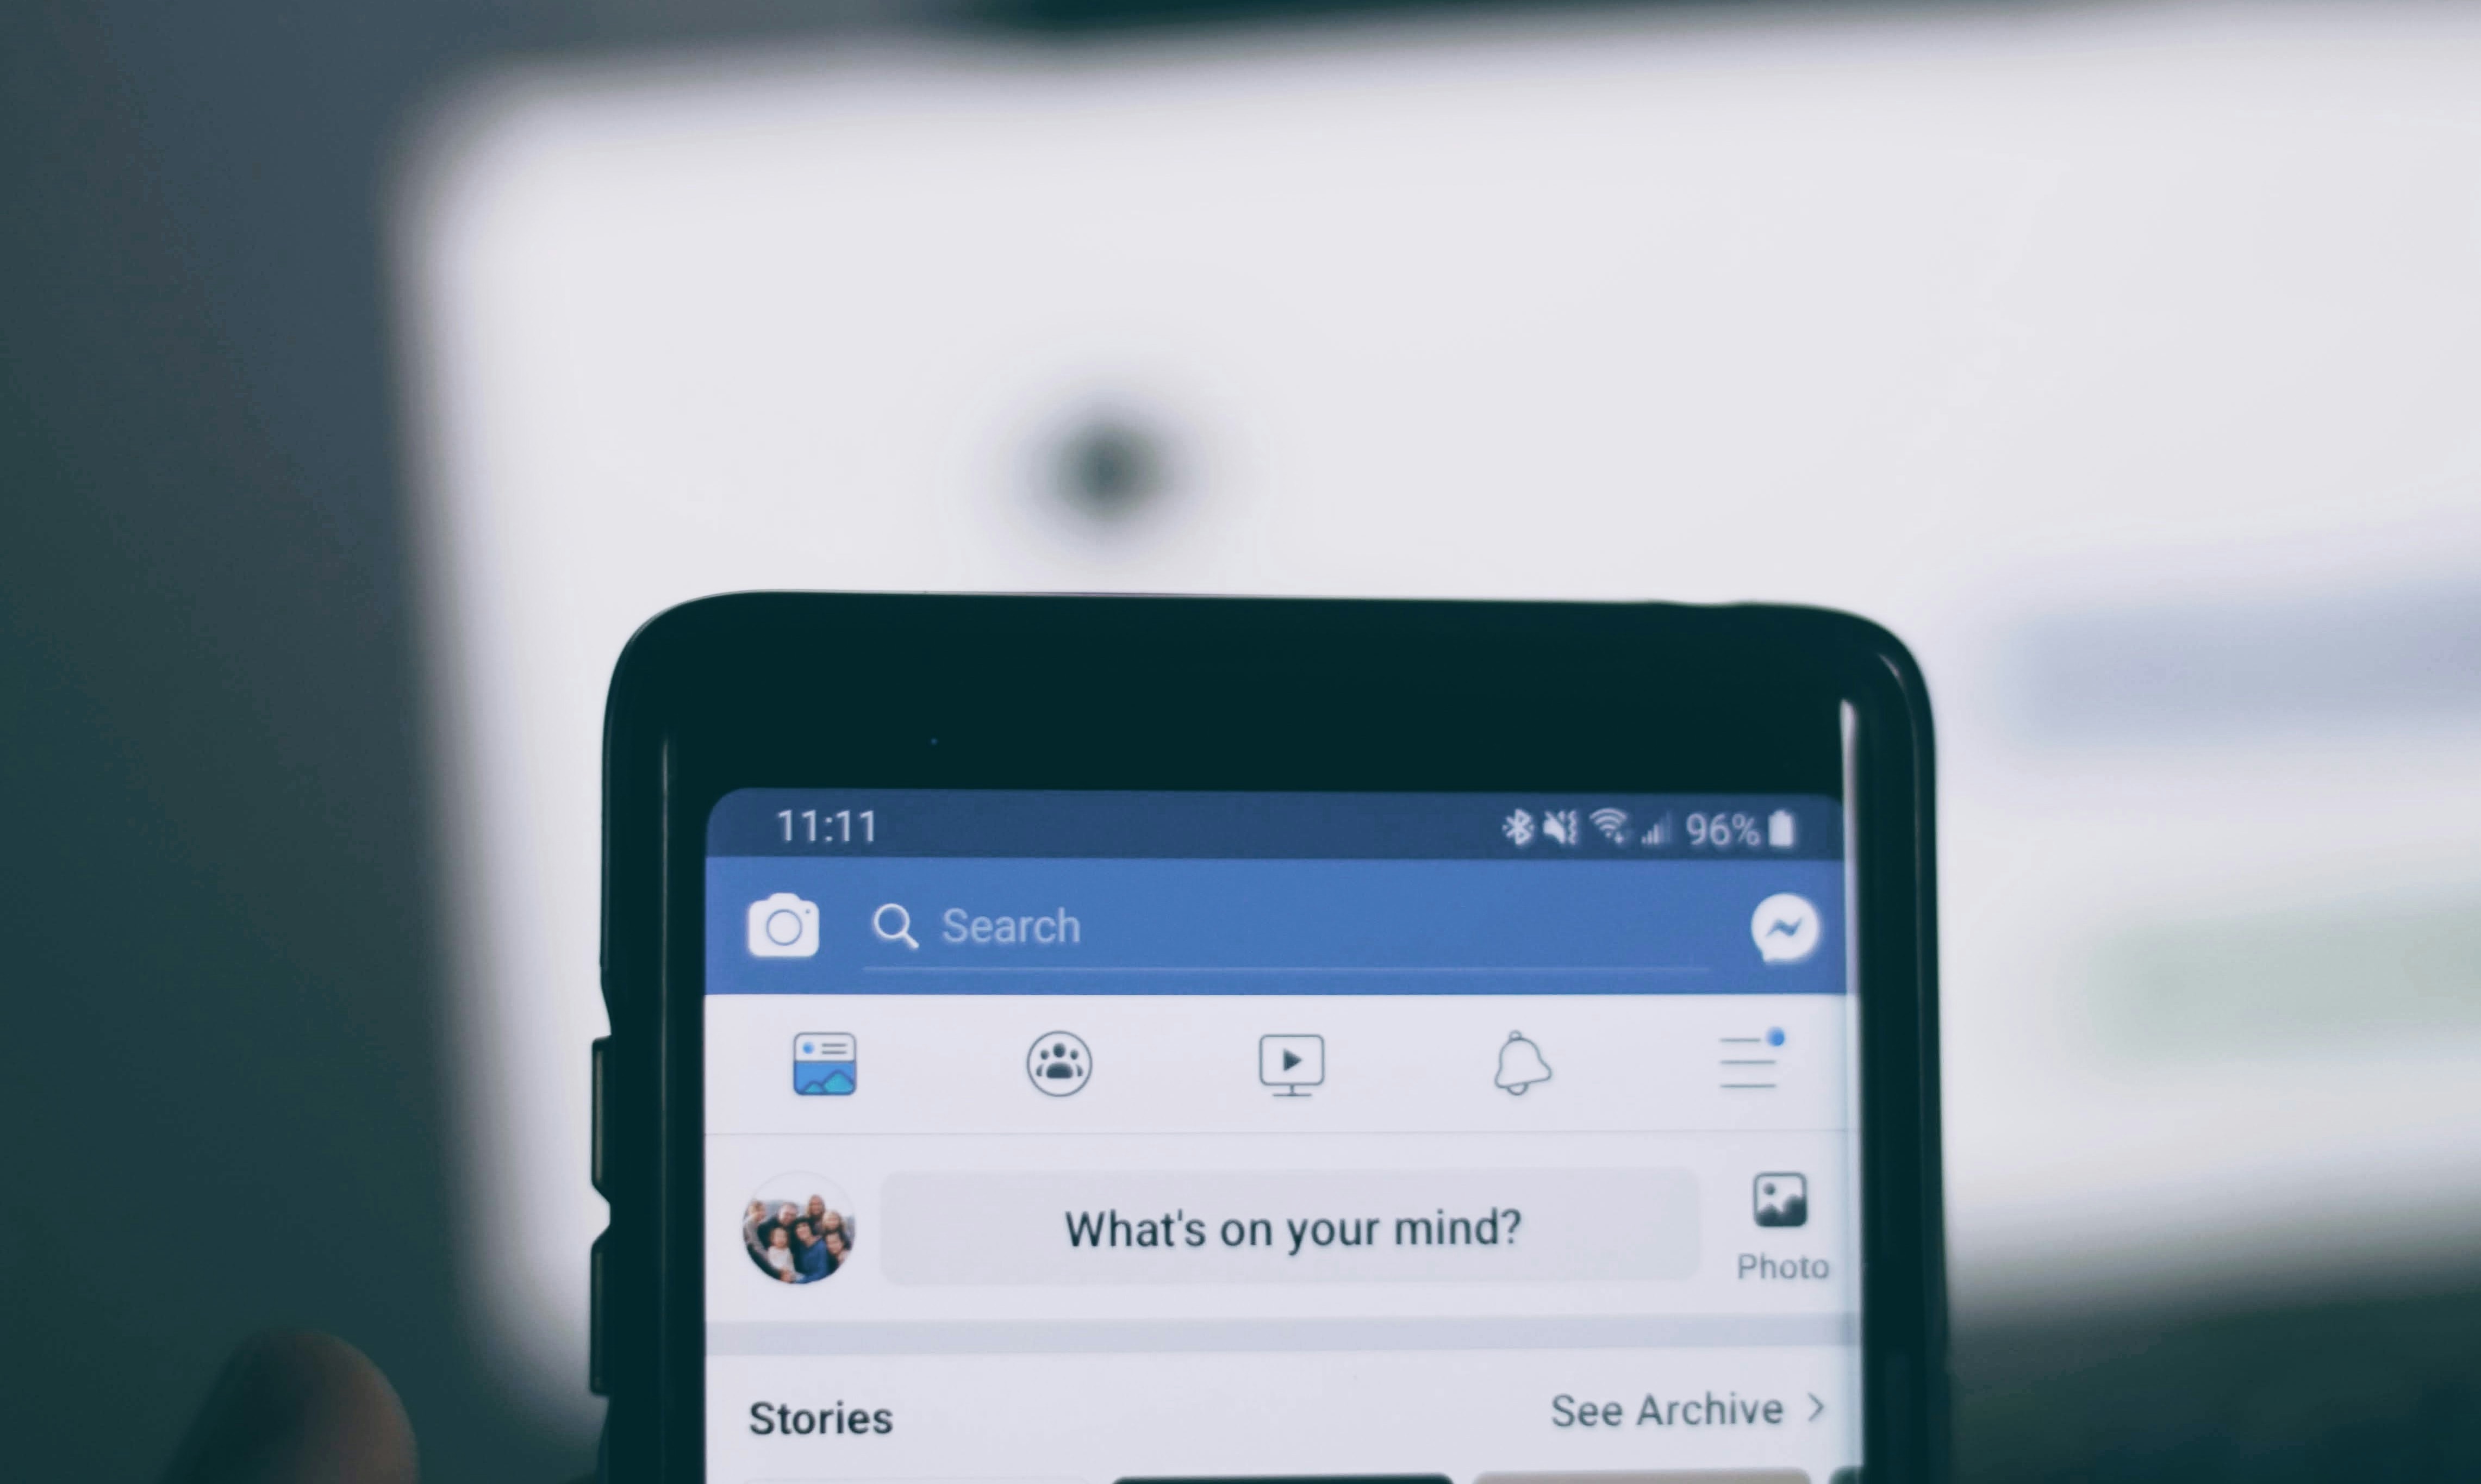 A phone showing Facebook home screen | Source: Unsplash